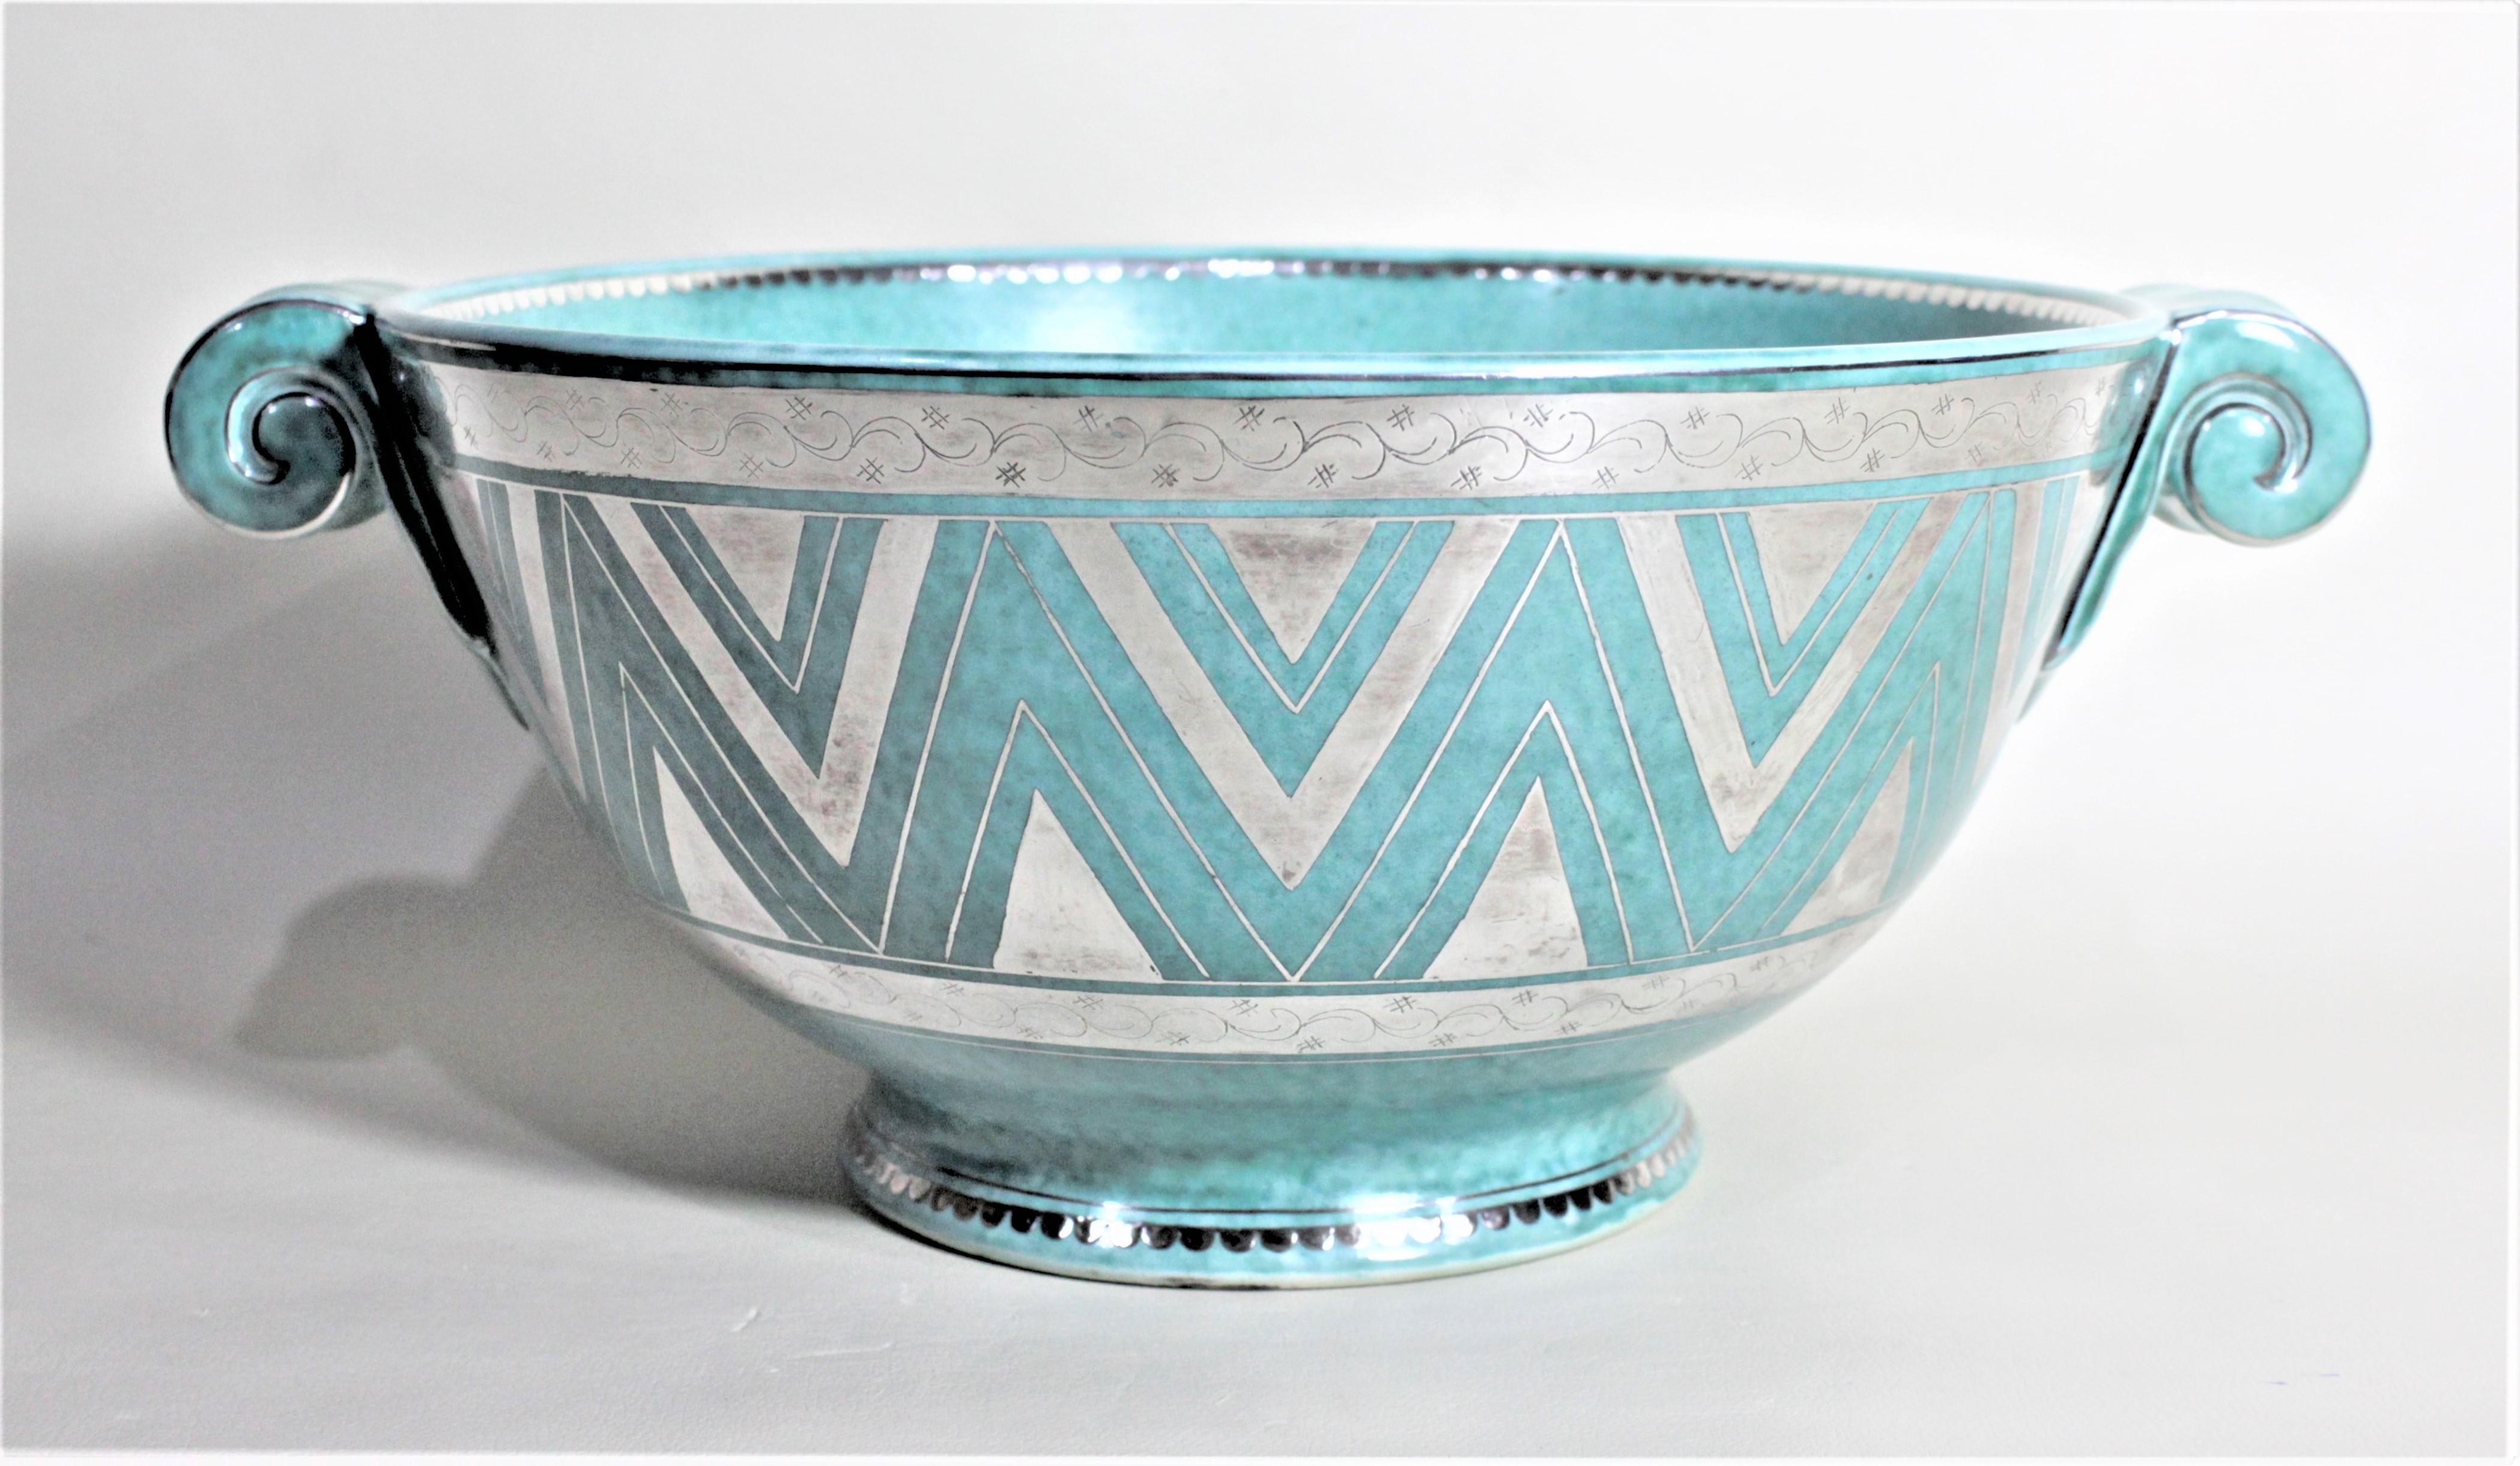 This large turquoise or 'argenta' Art Deco pottery bowl was done by Wilheim Kage for Gustavsberg of Sweden in approximately 1939. The bowl is done with scrolled handles and a pedestal base and heavily decorated with applied silver. The outside of